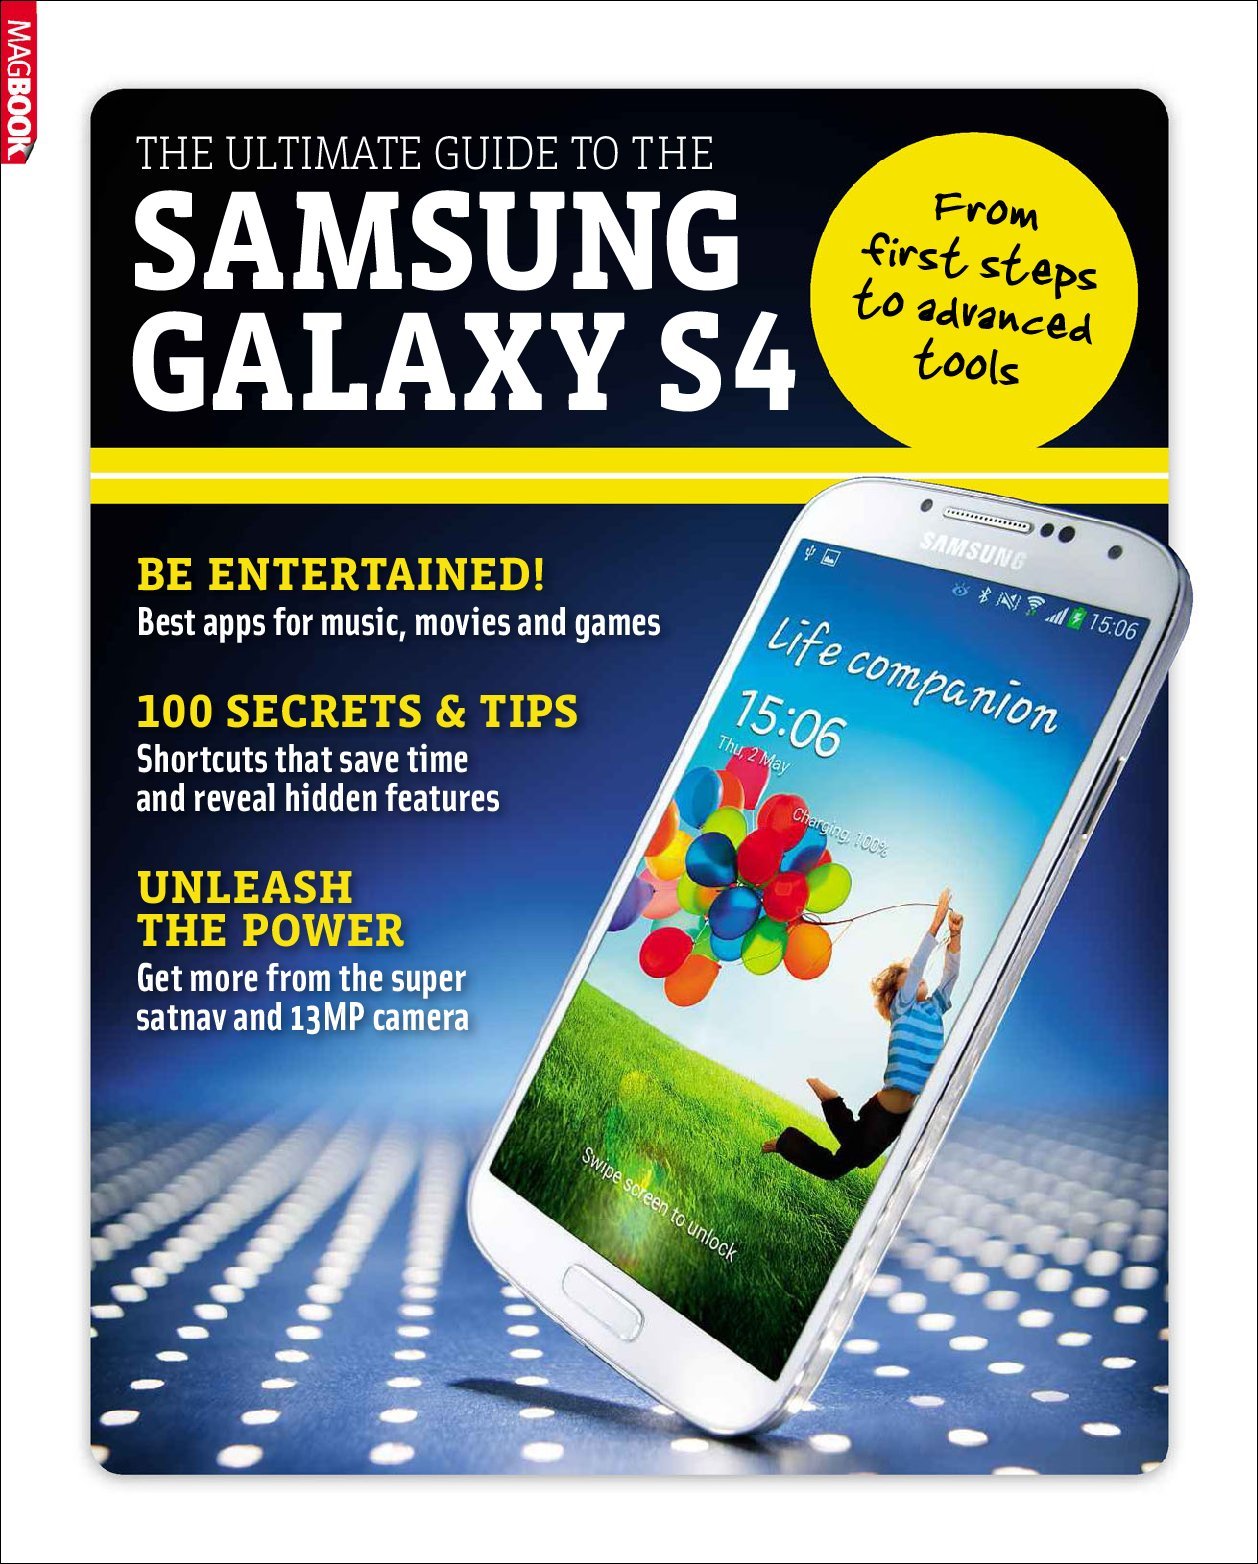 The Ultimate Guide To The Samsung Galaxy S4 (Digital)